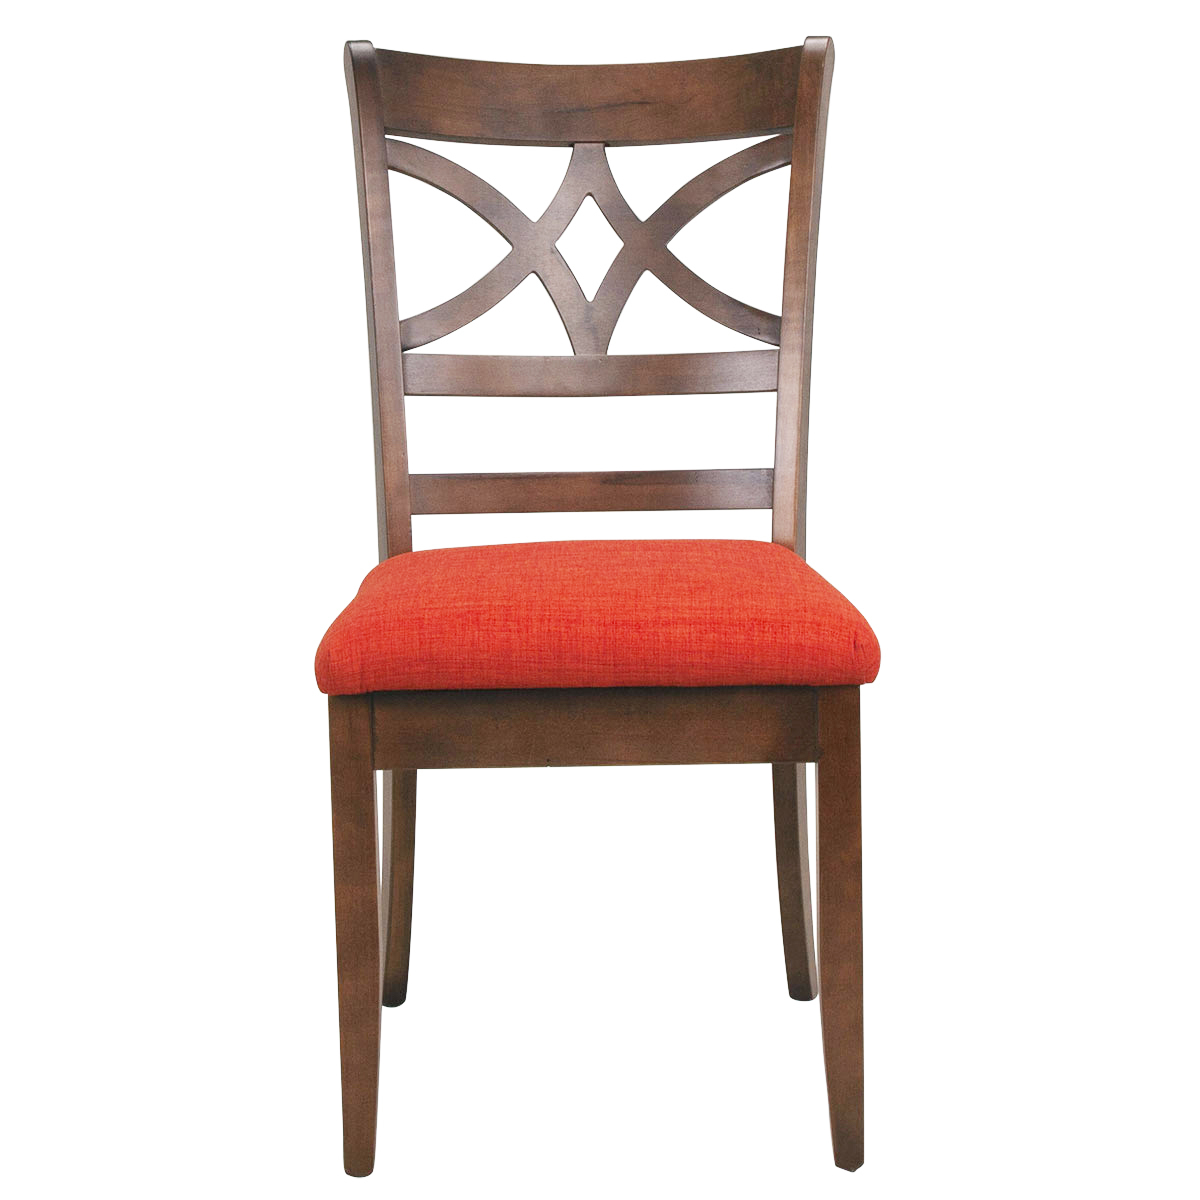 Picture of MERRILL SIDE CHAIR WITH UPHOLSTERED SEAT